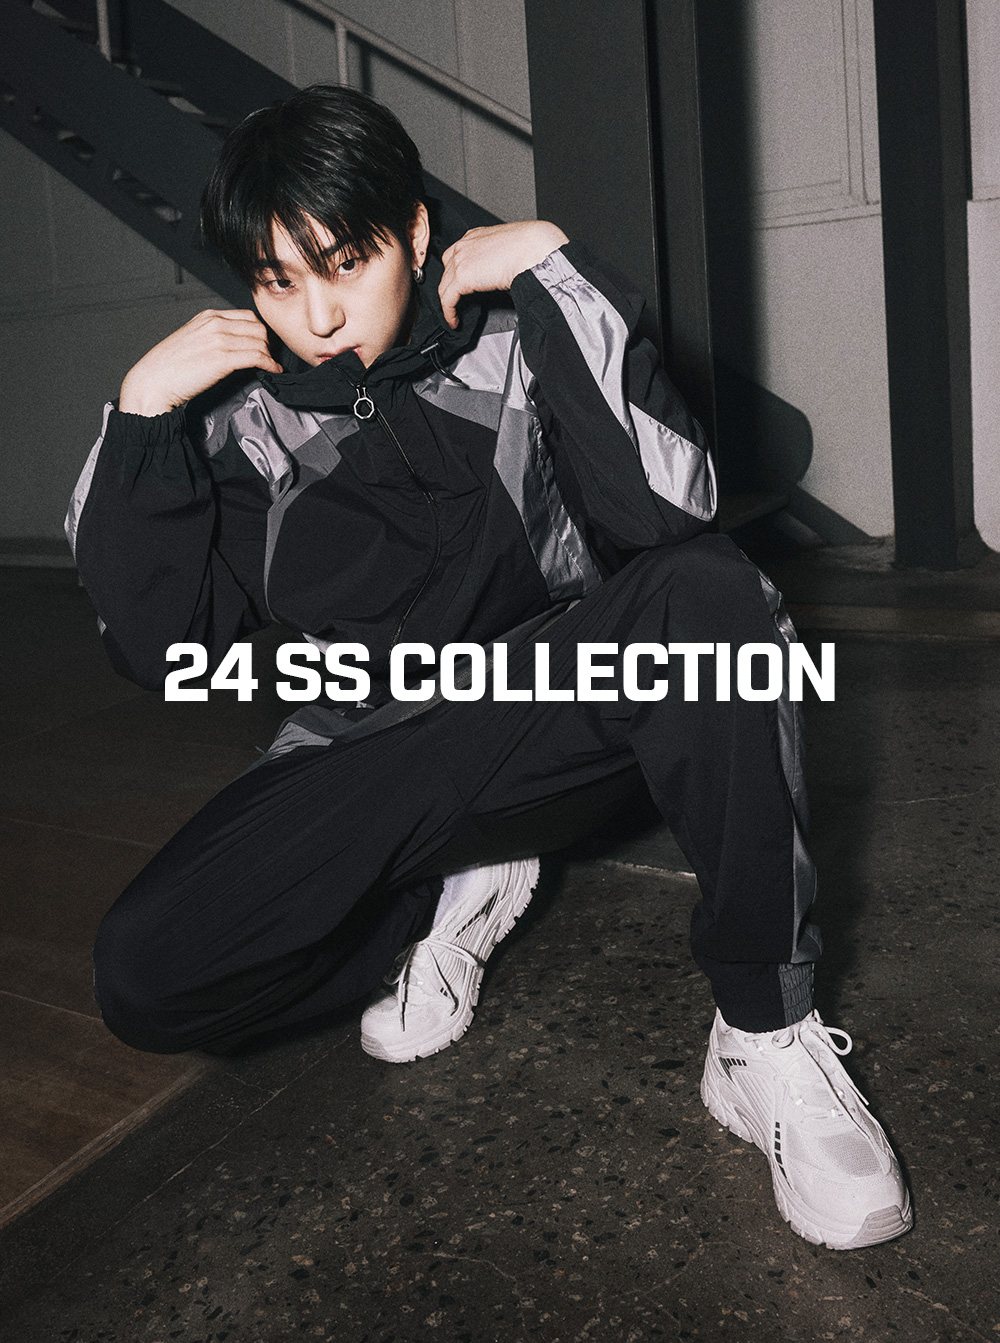 24 SS COLLECTION